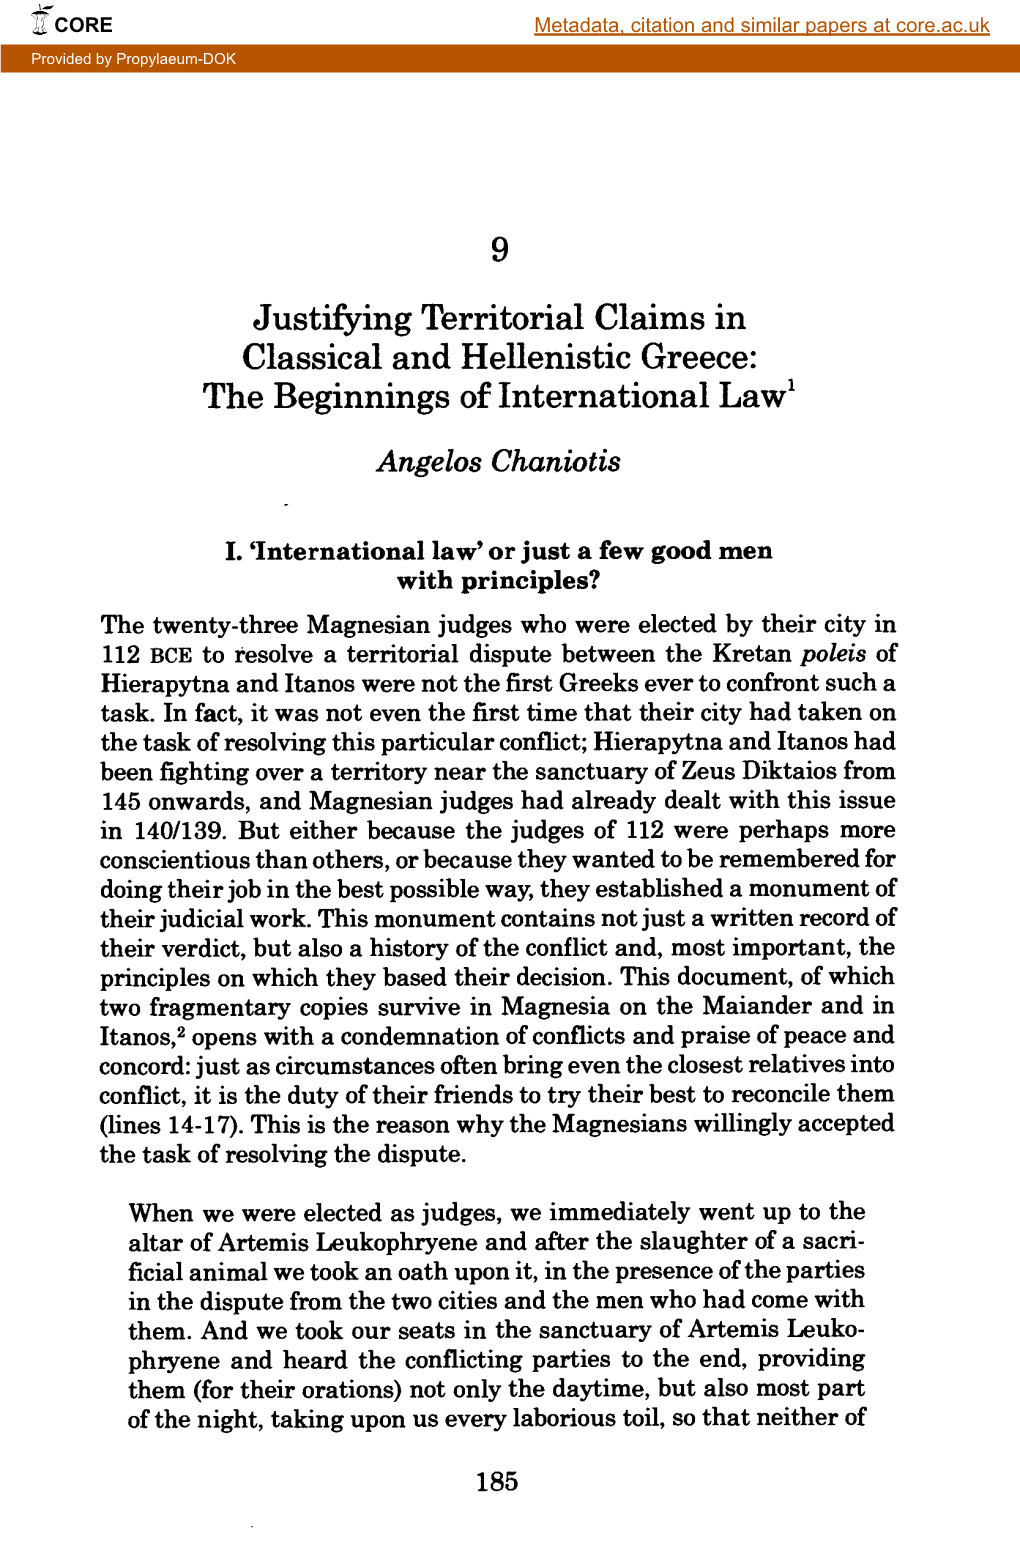 Justifying Territorial Claims in Classical and Hellenistic Greece: the Beginnings of International Law1